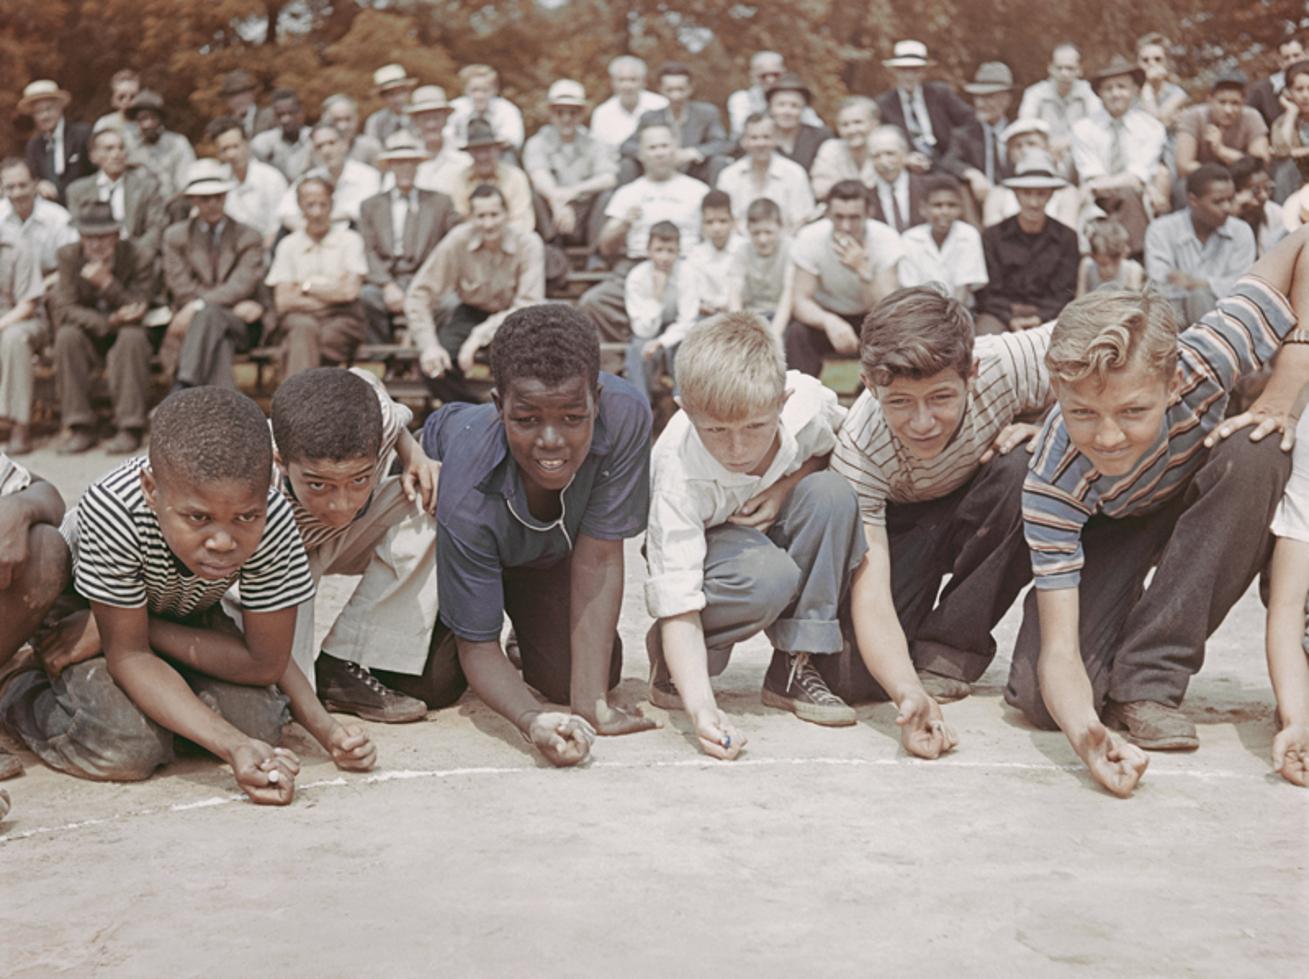 Marbles Championship 
1948
by Slim Aarons

Slim Aarons Limited Estate Edition

A group of boys competing in a marble championship in Central Park, New York City, 1948

unframed
c type print
printed 2023
16×20 inches - paper size


Limited to 150